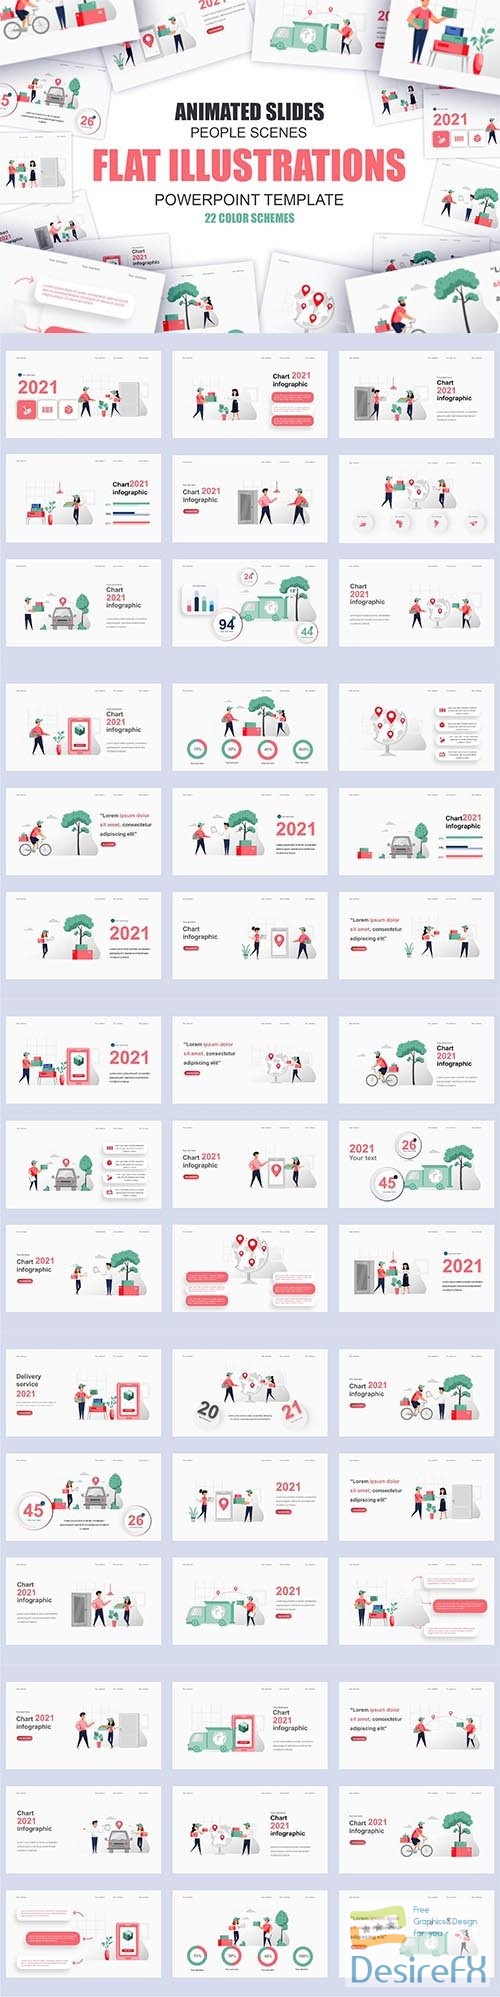 Delivery Illustration Powerpoint Template